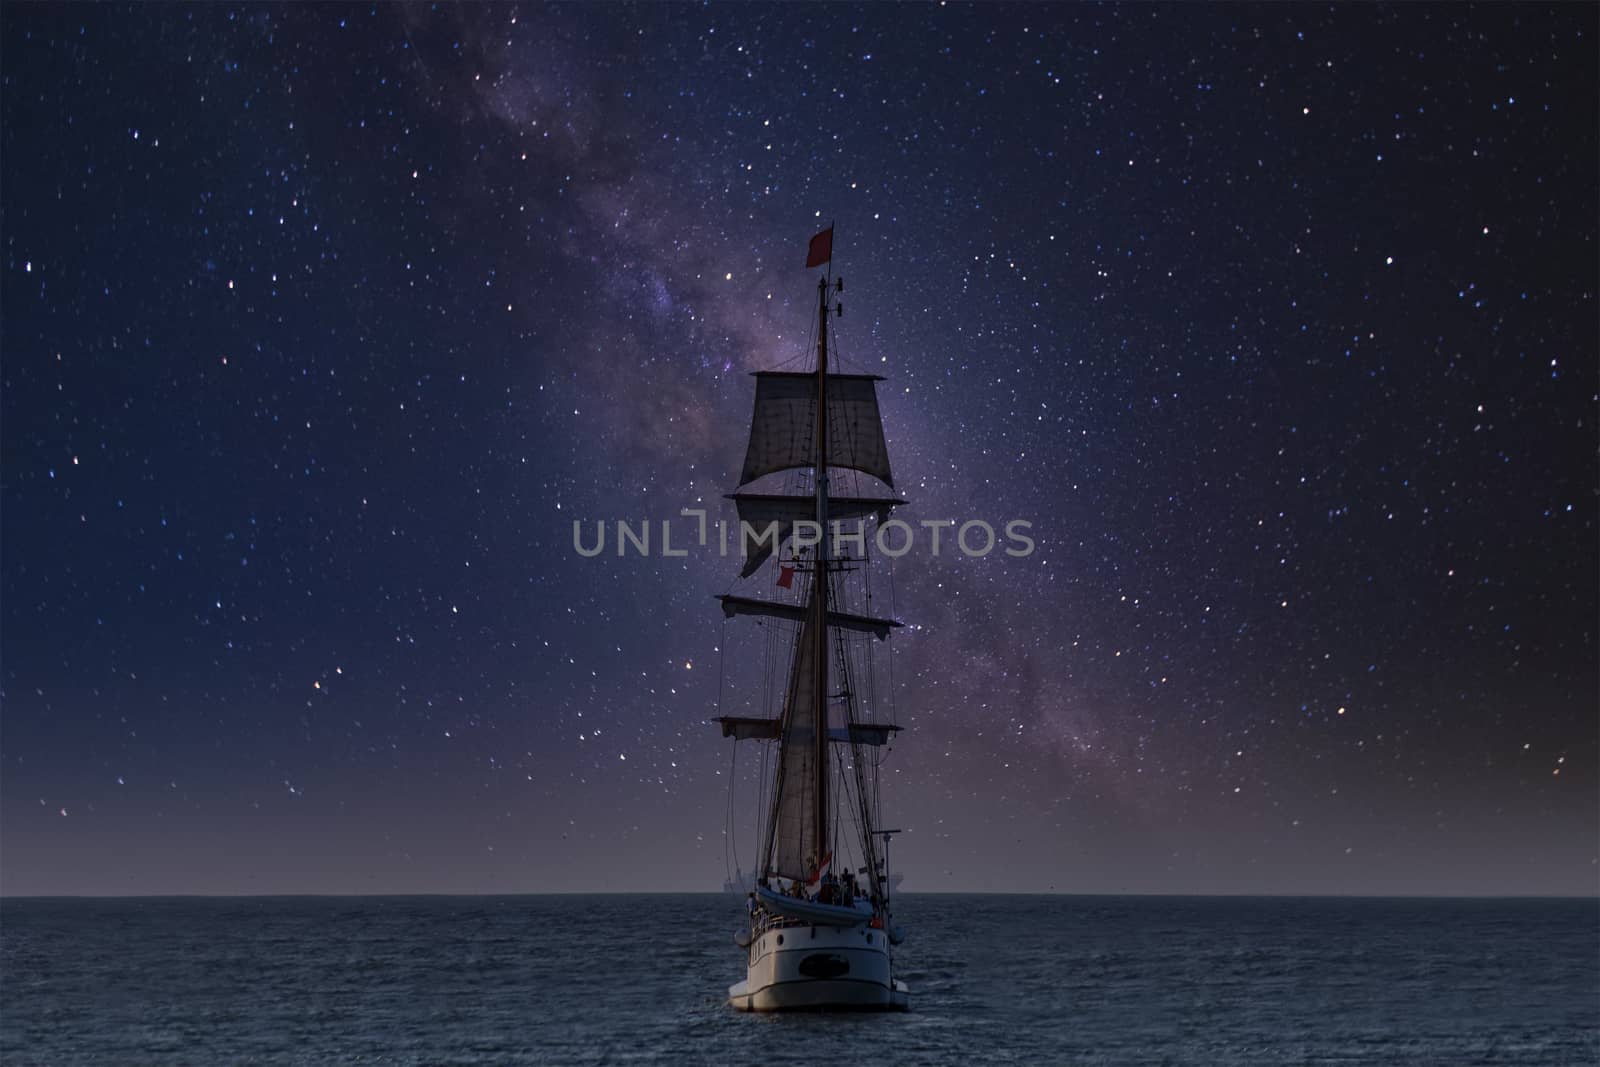 Antique tall ship, vessel leaving the harbor of The Hague, Scheveningen under a clear milky way sky by ankorlight